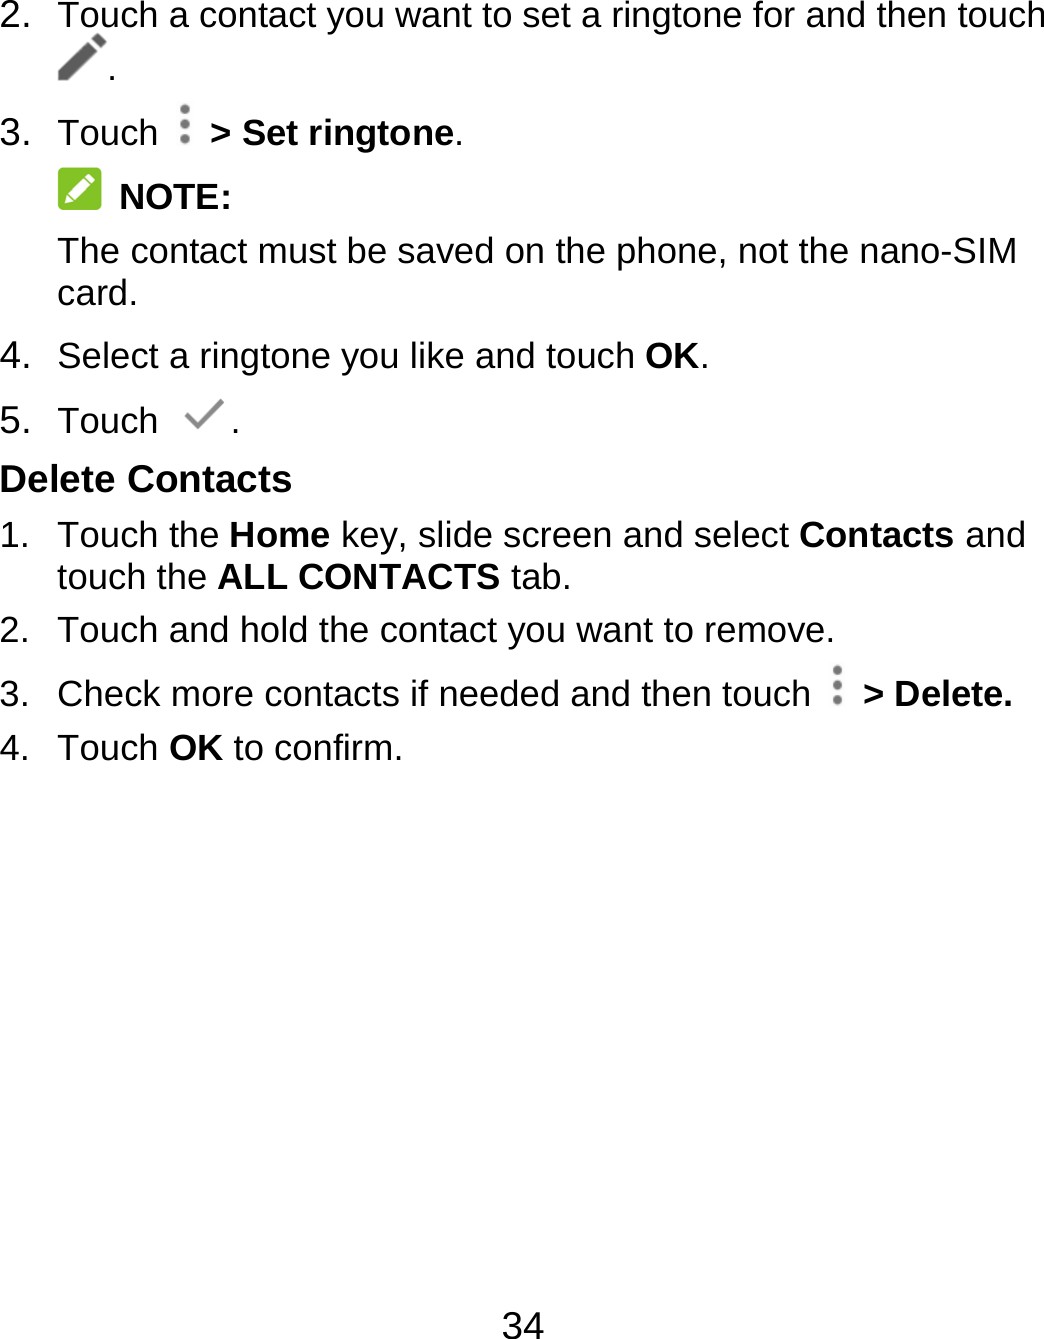 34 2.  Touch a contact you want to set a ringtone for and then touch . 3.  Touch   &gt; Set ringtone.  NOTE: The contact must be saved on the phone, not the nano-SIM card. 4.  Select a ringtone you like and touch OK. 5.  Touch  . Delete Contacts 1. Touch the Home key, slide screen and select Contacts and touch the ALL CONTACTS tab. 2.  Touch and hold the contact you want to remove. 3.  Check more contacts if needed and then touch   &gt; Delete. 4. Touch OK to confirm. 